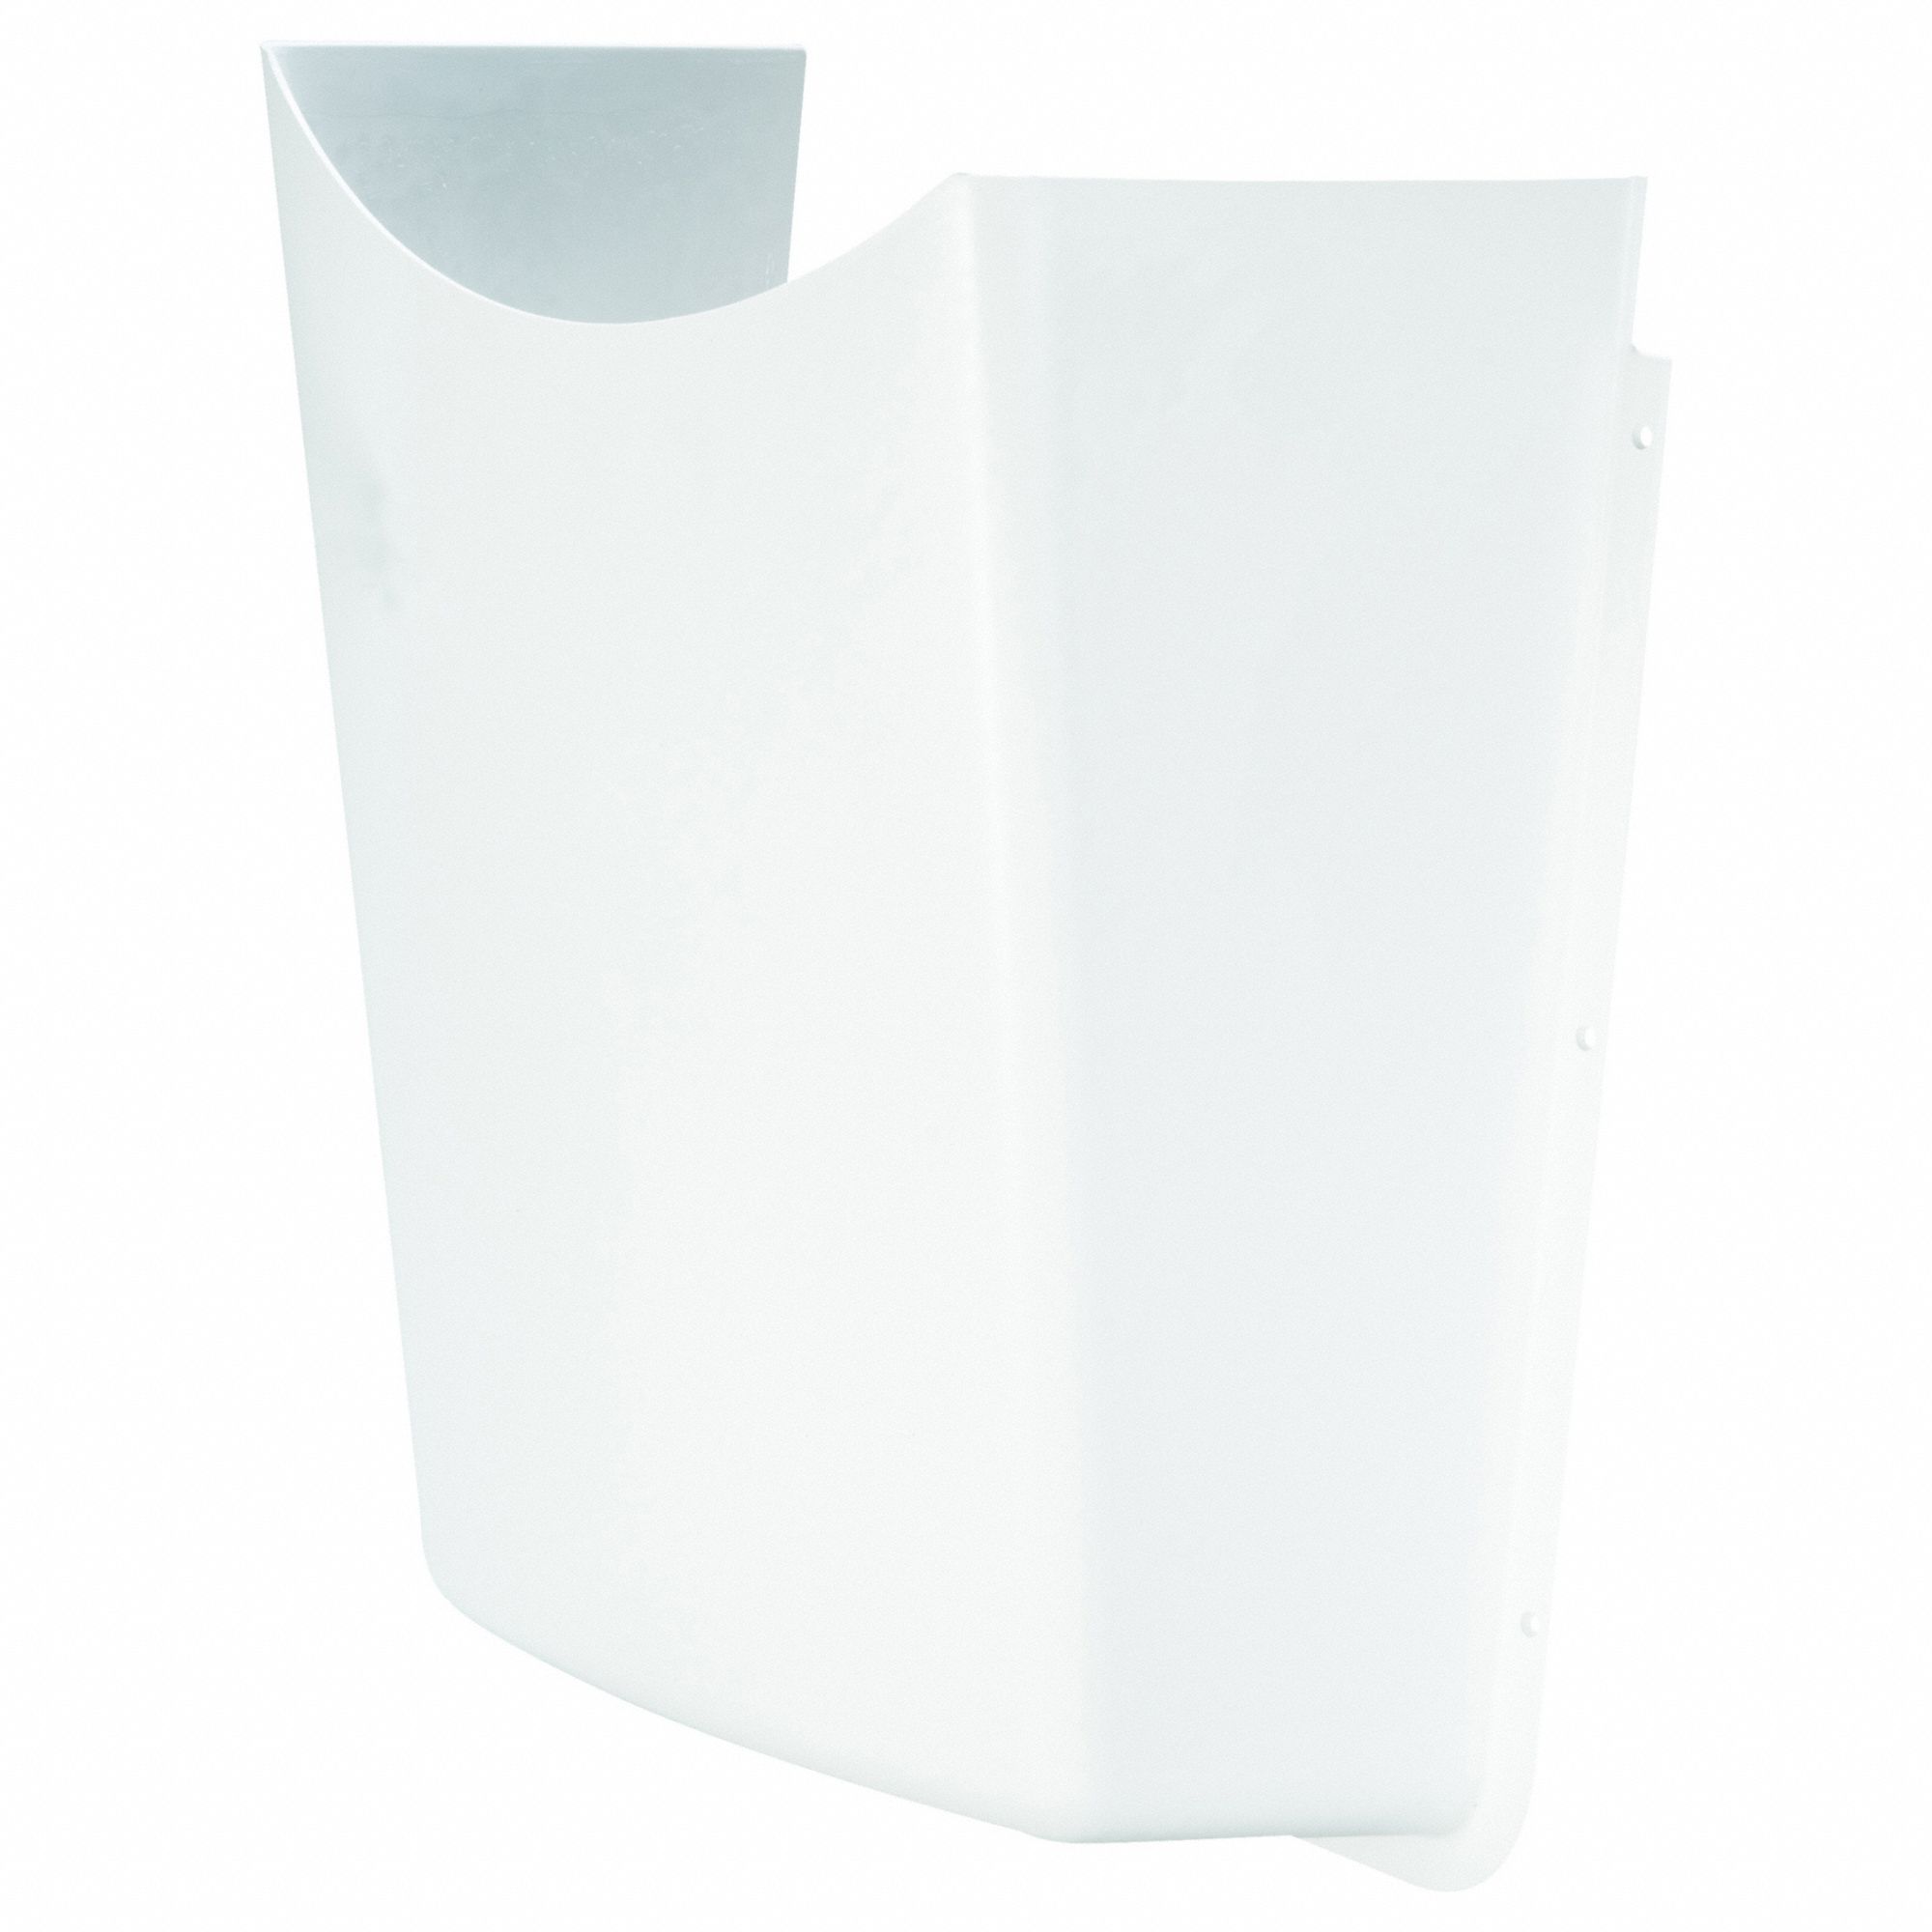 Lavatory Shield: PVC, White, 3/32 in Nominal Wall, 1 Pieces